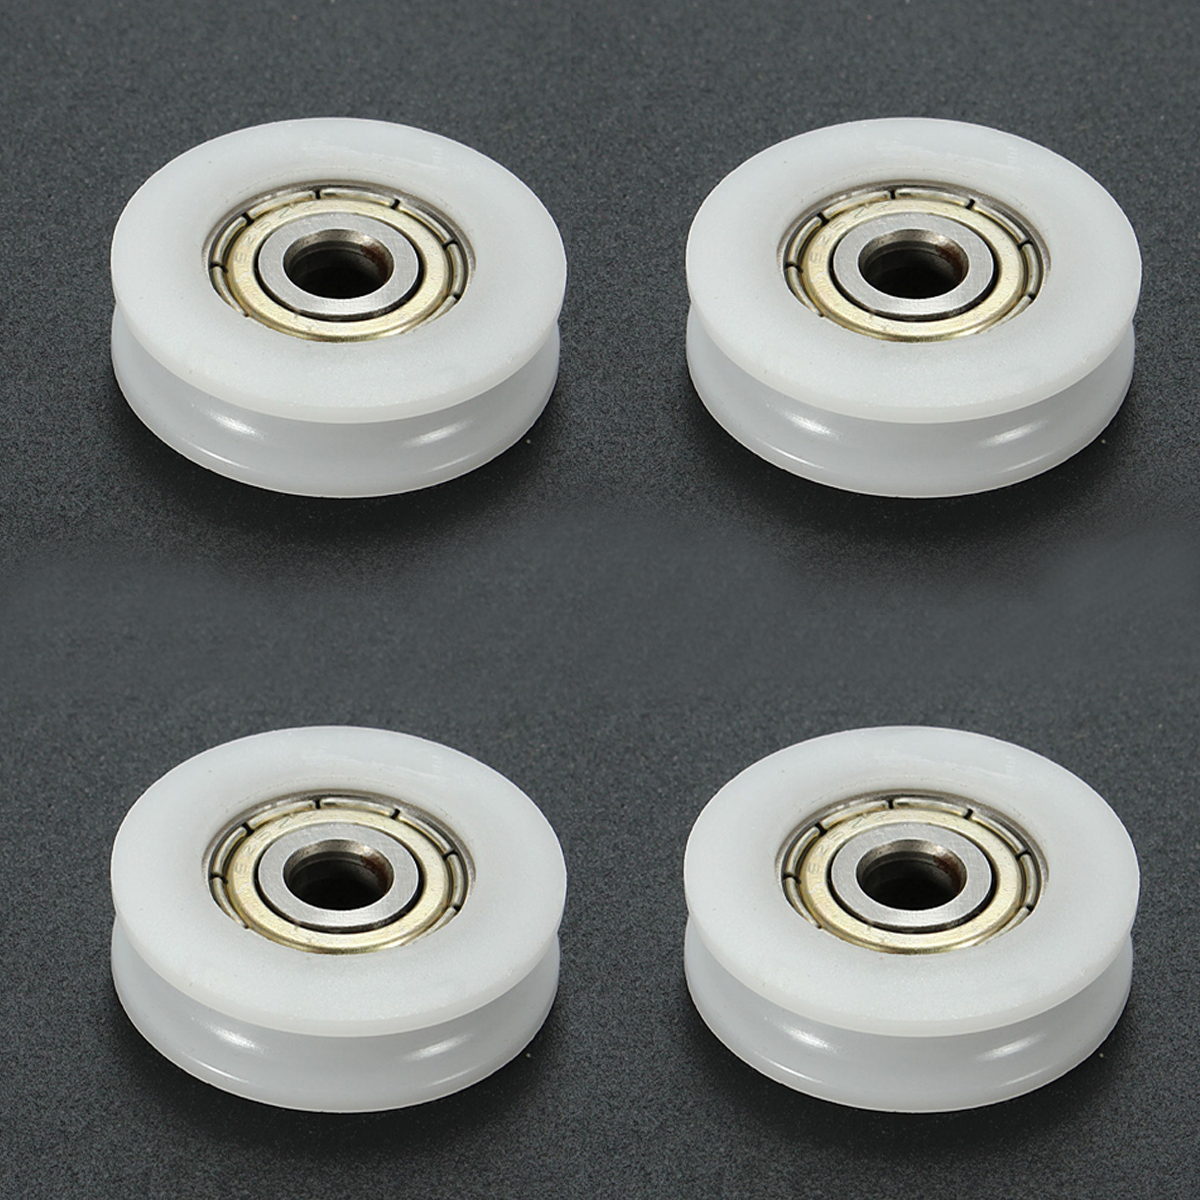 

4pcs 5x24x7mm U Groove Nylon Round Pulley Wheel Roller For 3.8mm Rope Ball Bearing